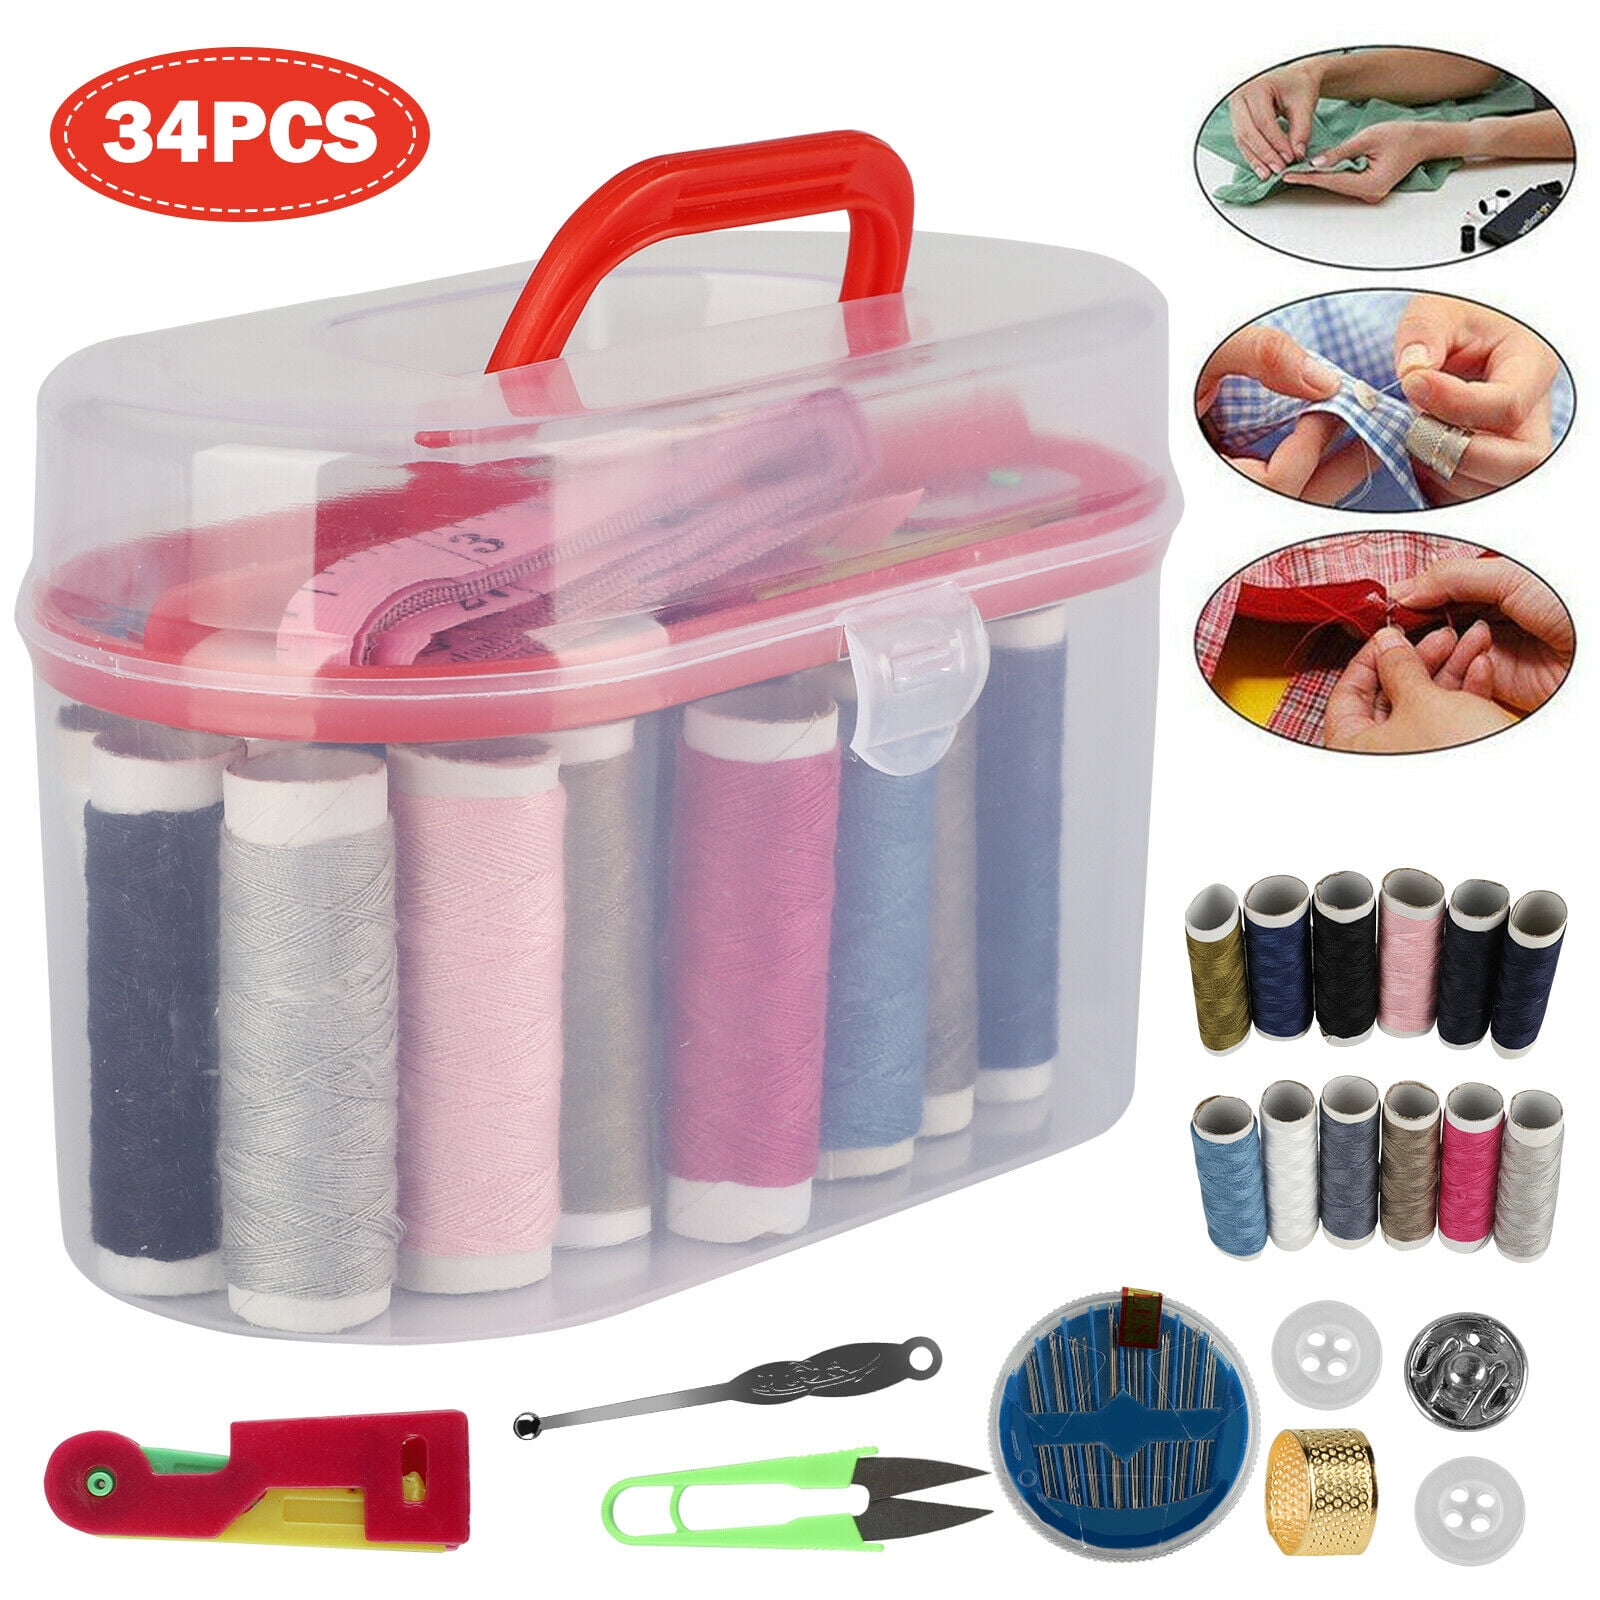 Practical Travel Sewing Kit with Scissor Tape Measure Thimble Needle Storage Box